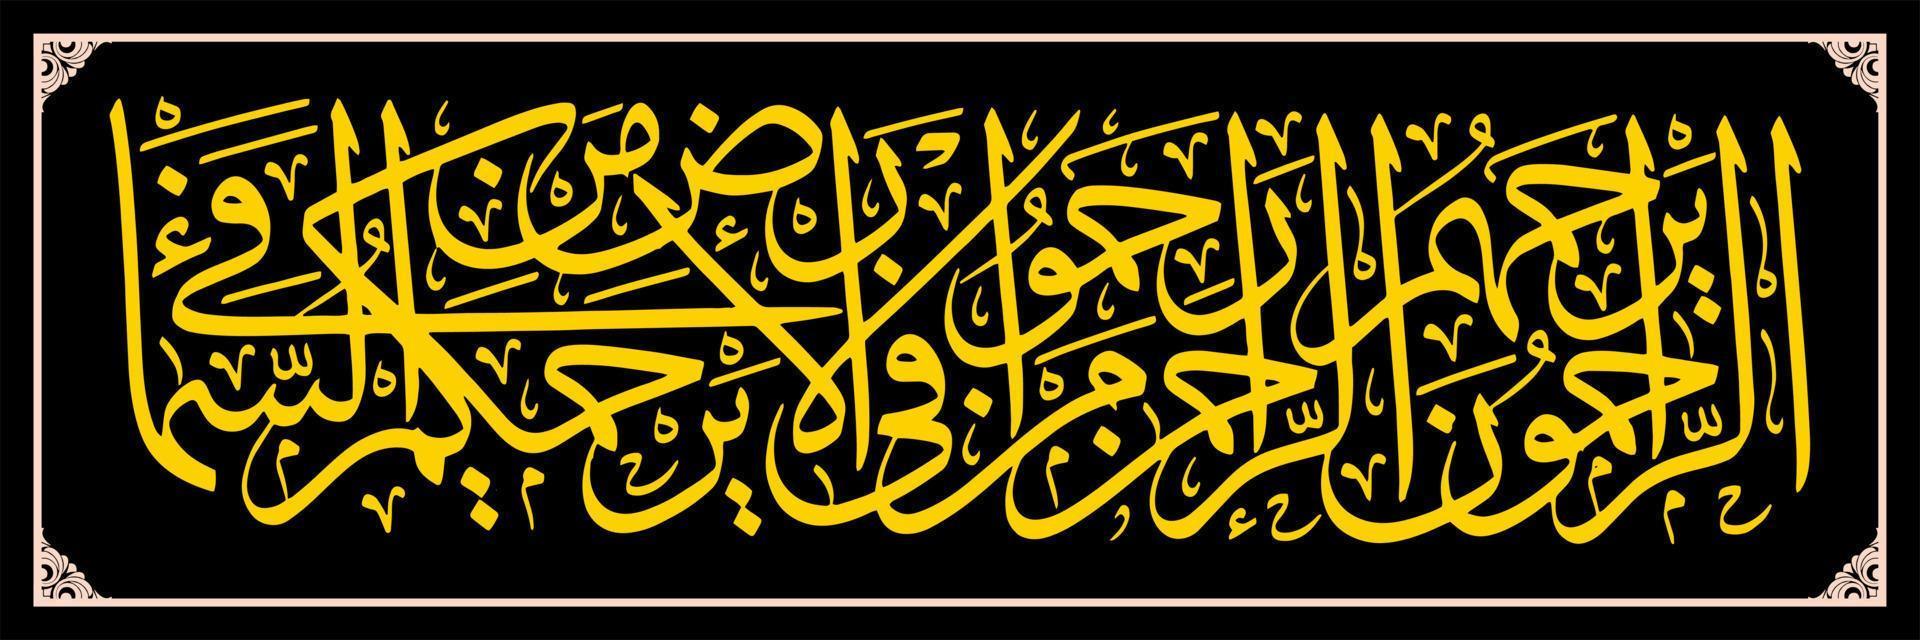 Arabic calligraphy, translation Those who are merciful, will be loved by Allah, the Rahman. Therefore, love all creatures on earth, surely all creatures in the sky will love you all vector